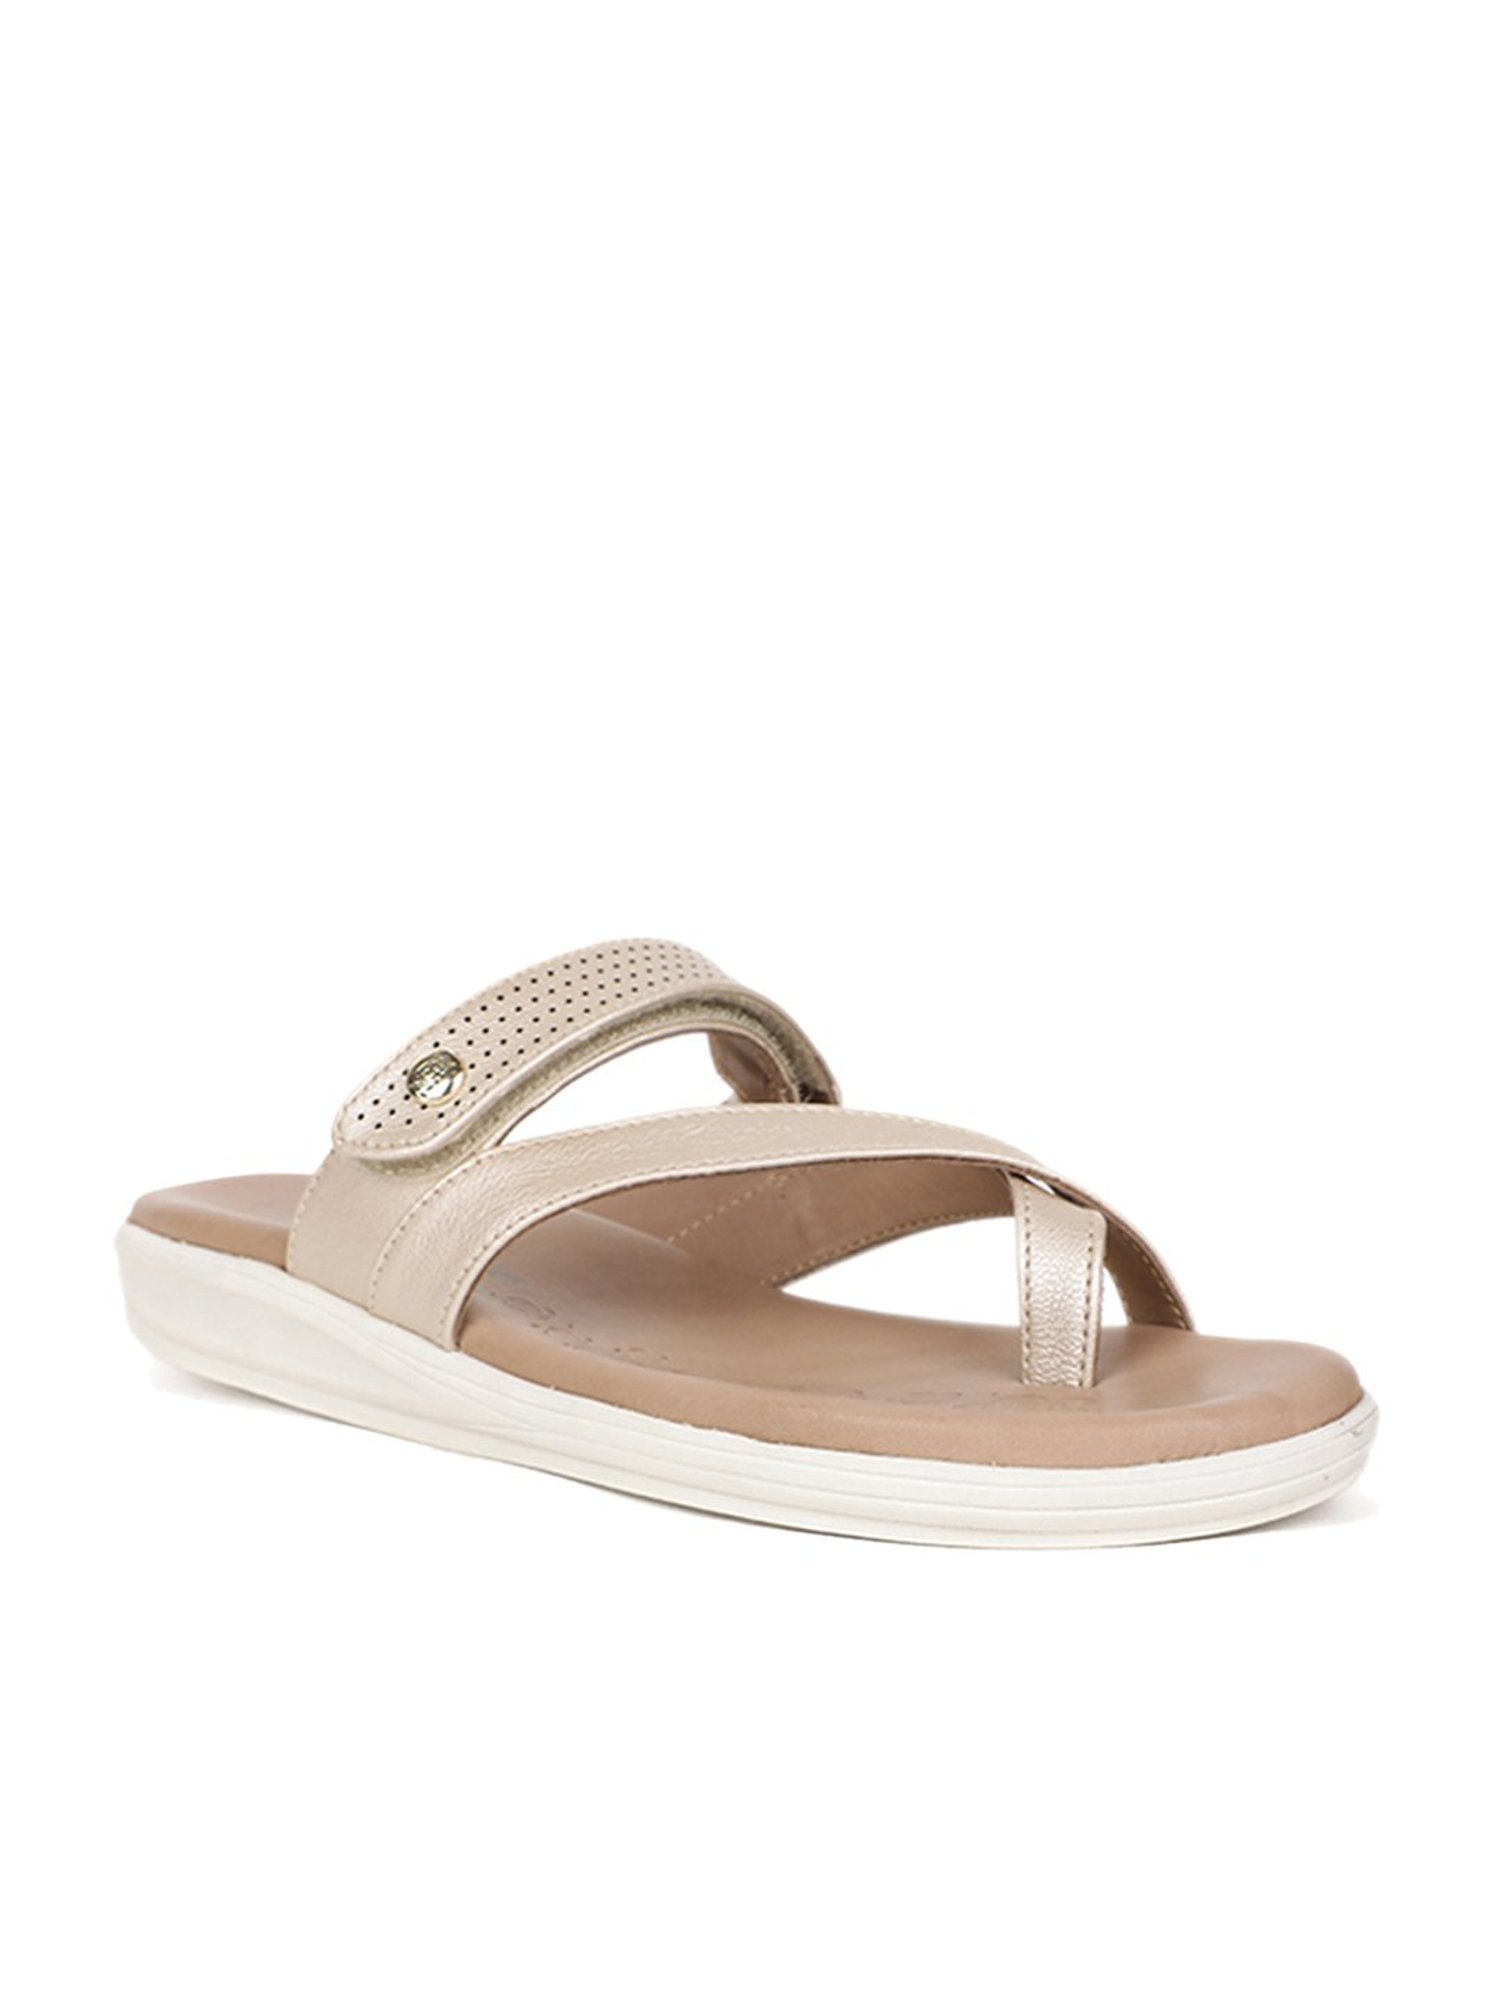 21 customer-loved Amazon sandals to shop under $30